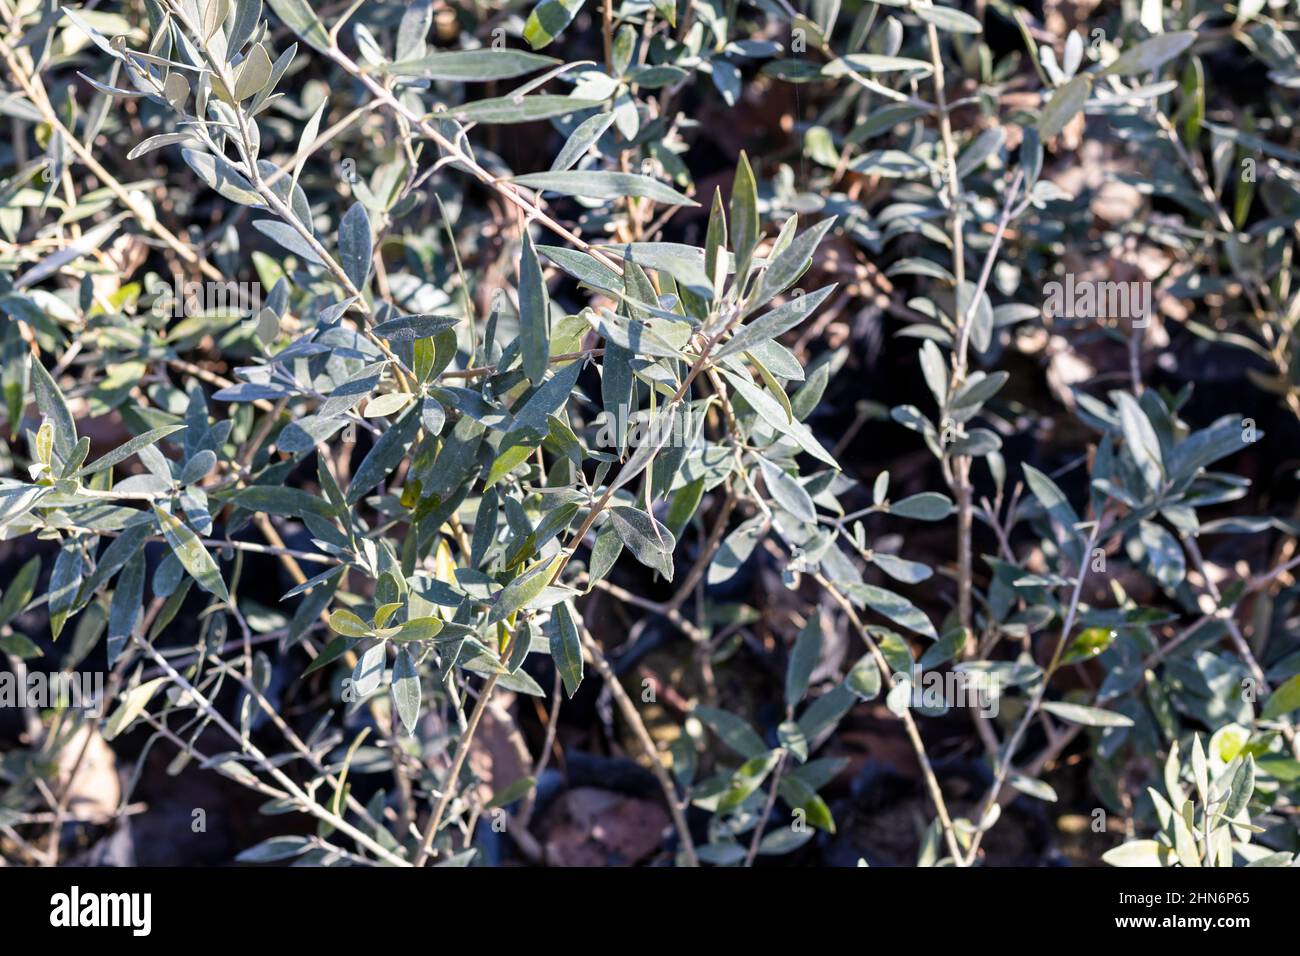 Olive evergreen plants in a bags Stock Photo